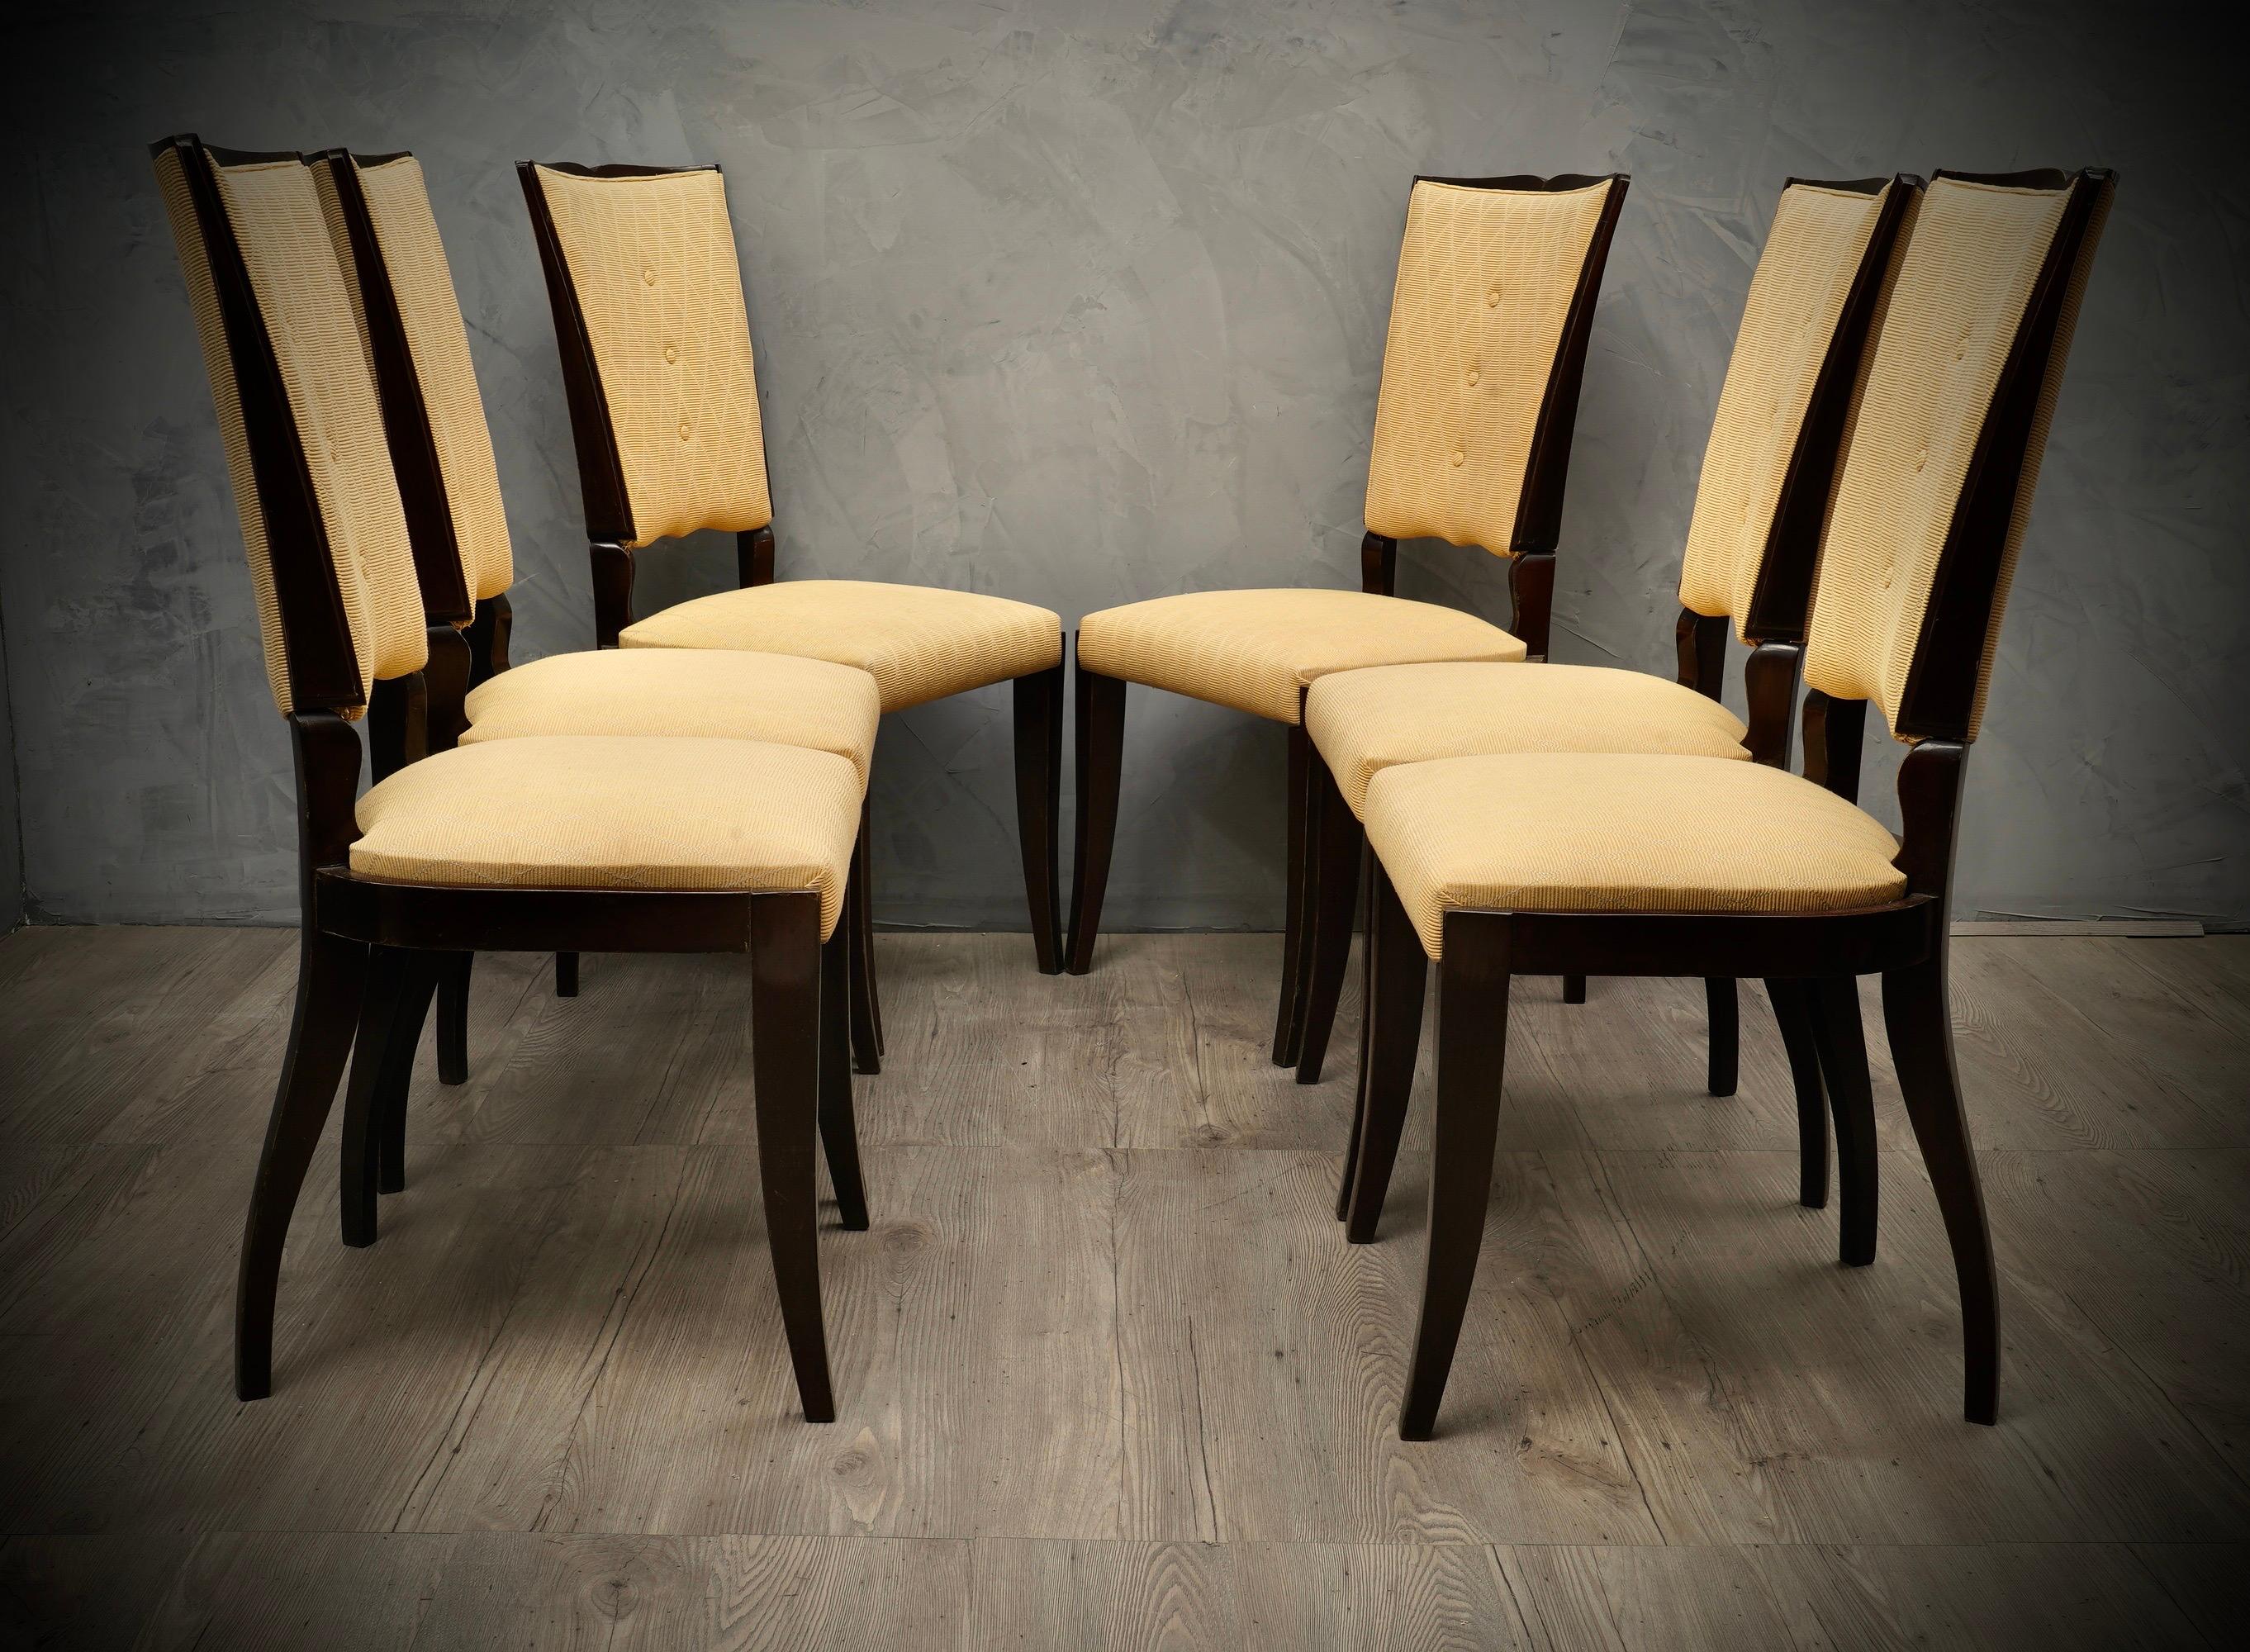 Midcentury Italian Dining Room Chairs, 1940 For Sale 1